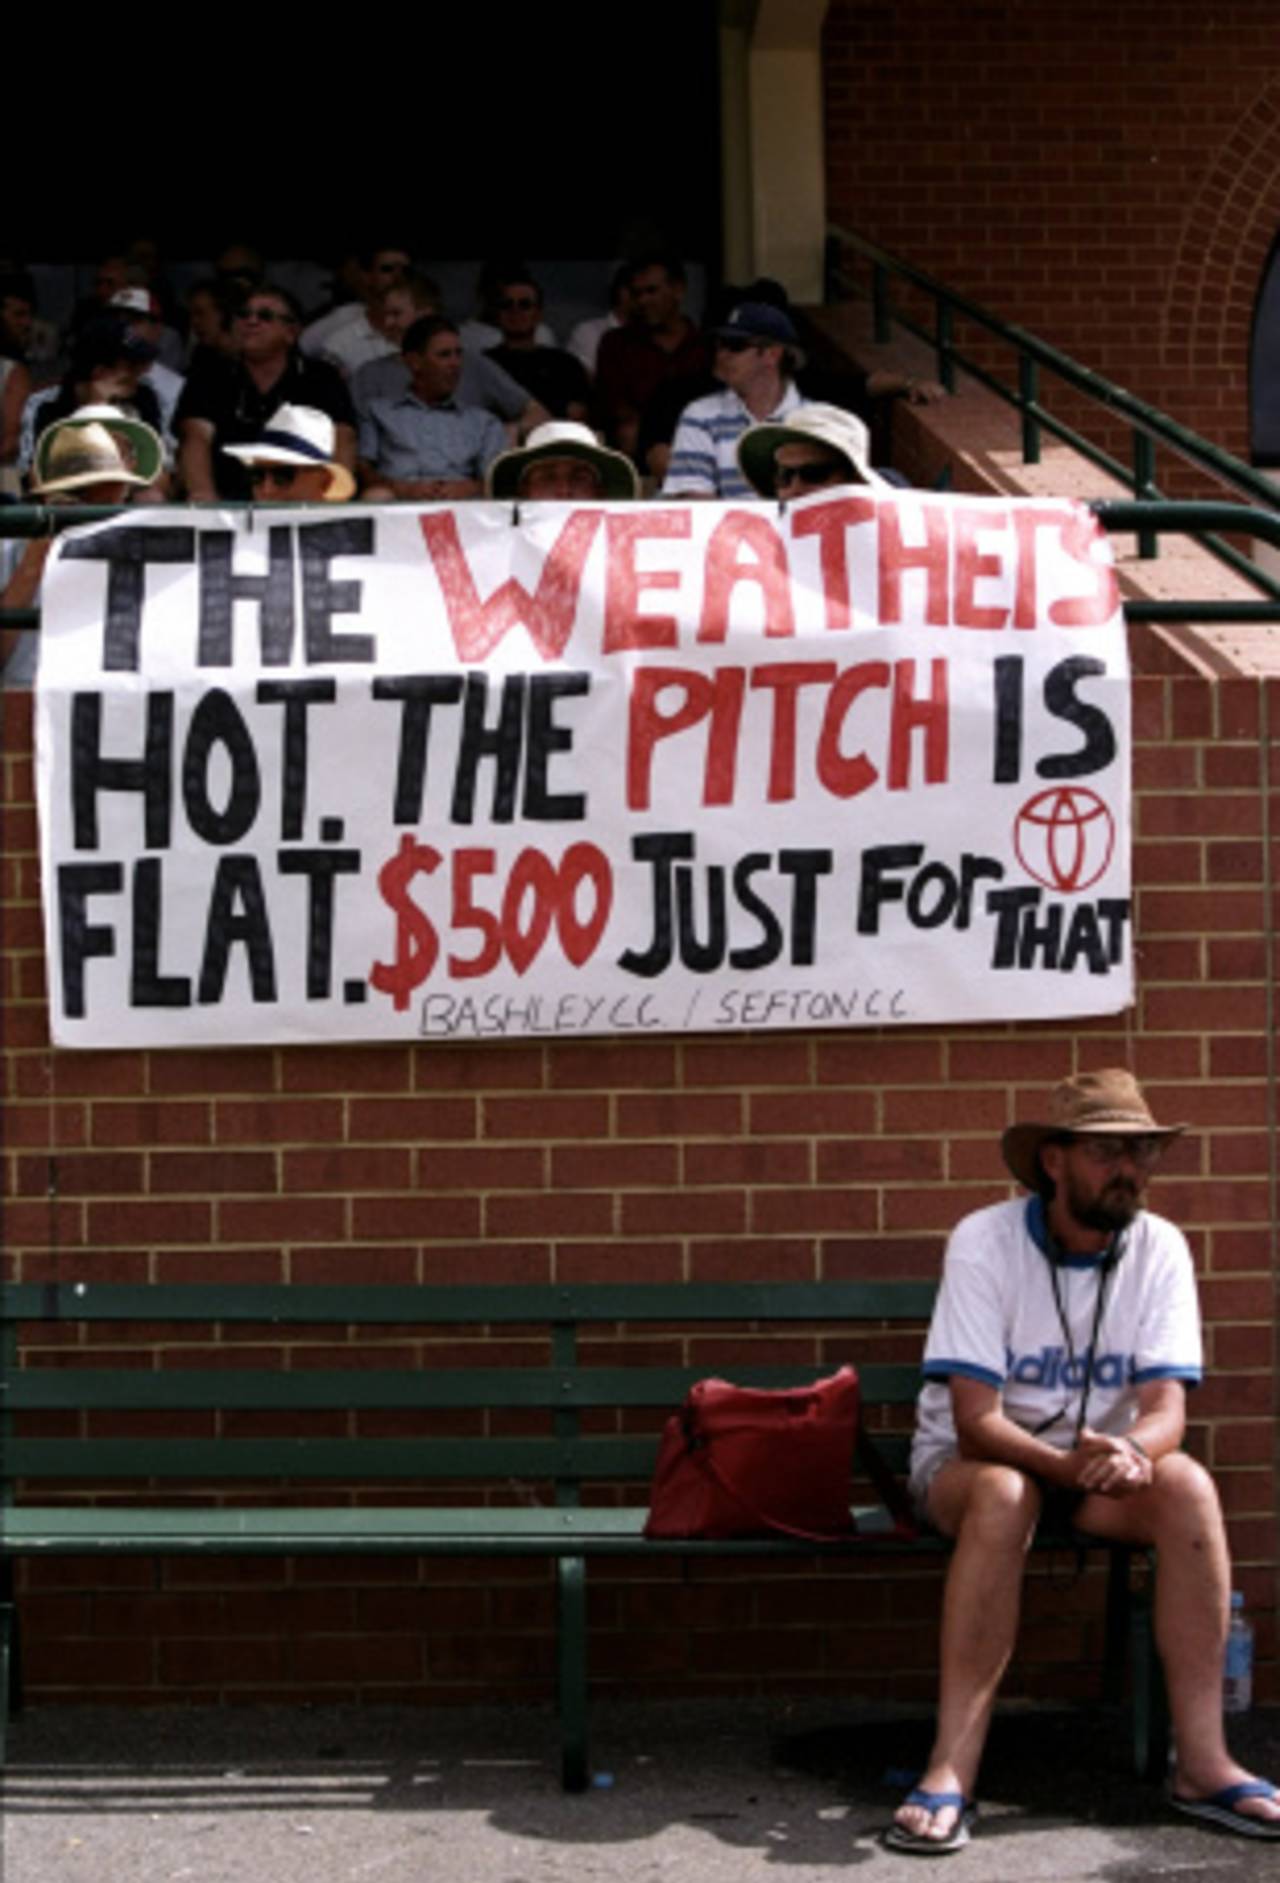 Spectators display a banner referring to the betting scandal involving Mark Waugh and Shane Warne, third Test, Australia v England, Adelaide, 11 December 1998